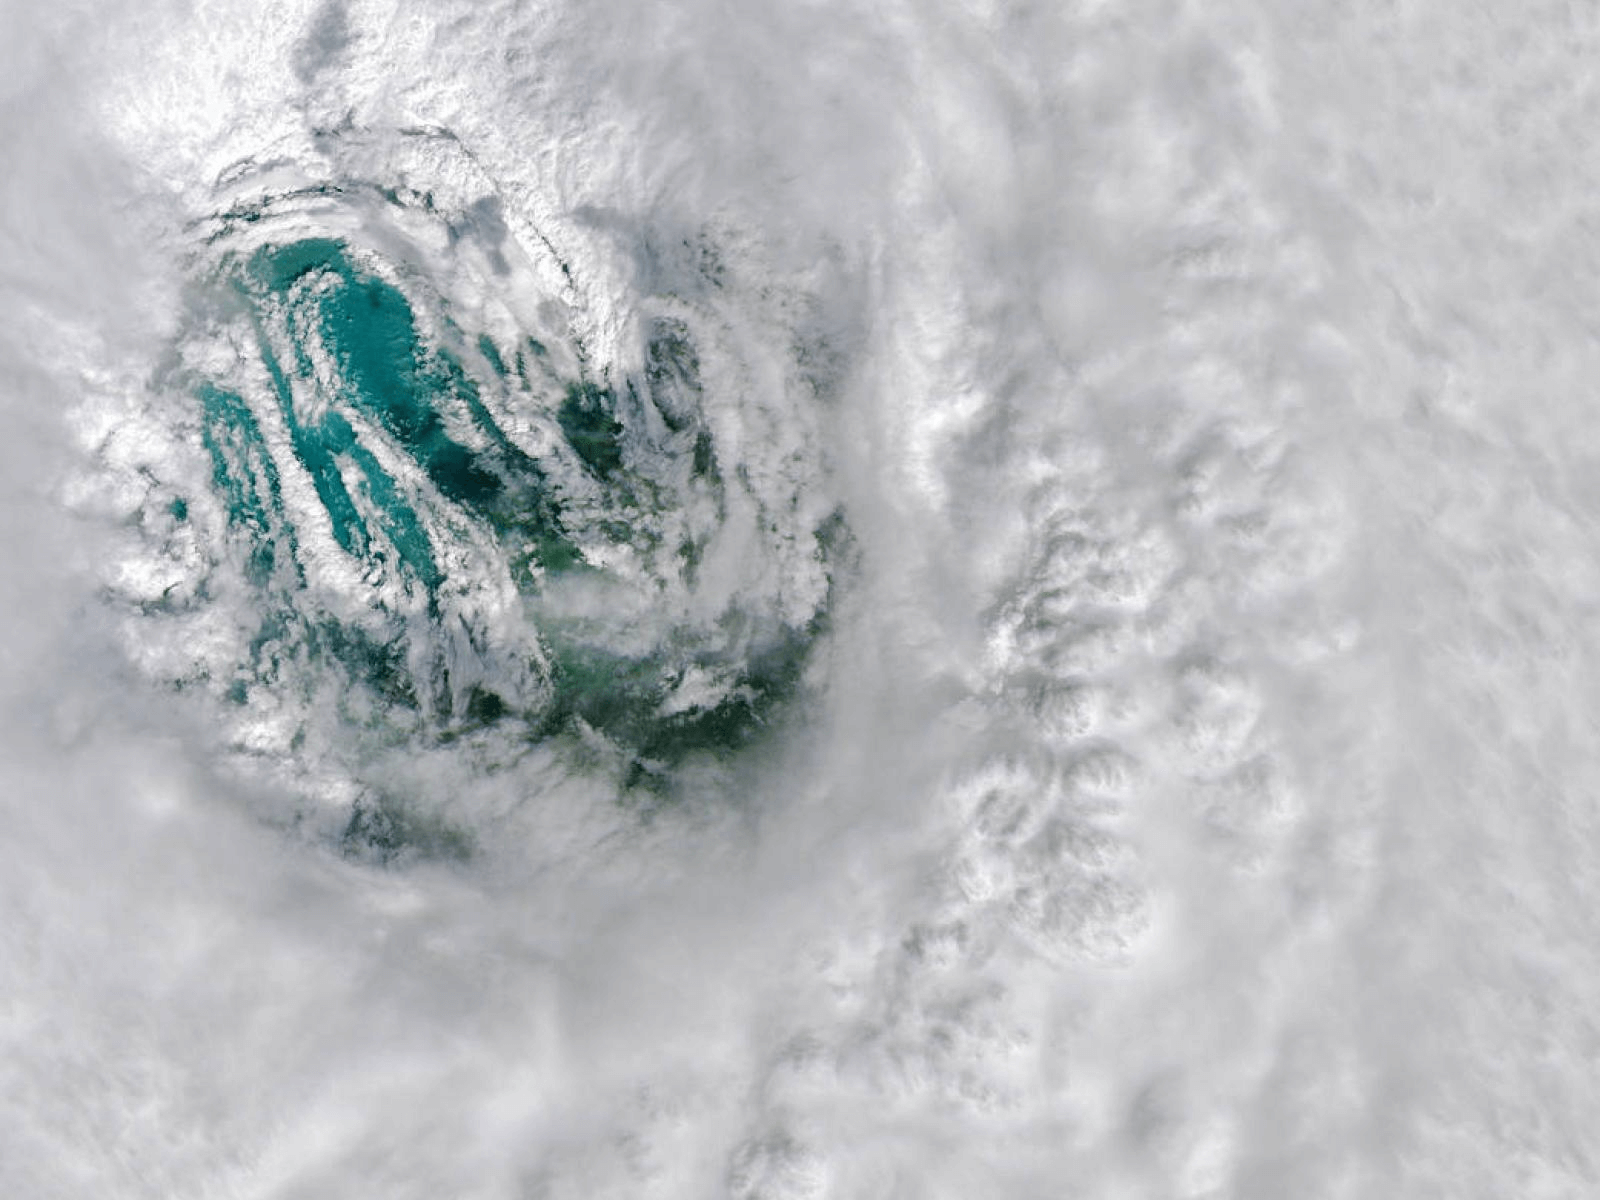 This image depicts the eye of Hurricane Ian. Thick, spinning thunderstorm clouds encircle and form the eye of the storm.close Hurricane Ian, whose wide eye is shown here, is among the strongest storms to strike the U.S. coast. New research finds that rapidly intensifying hurricanes such as Ian will develop faster and grow wetter in a future marked by continued fossil fuel reliance. 